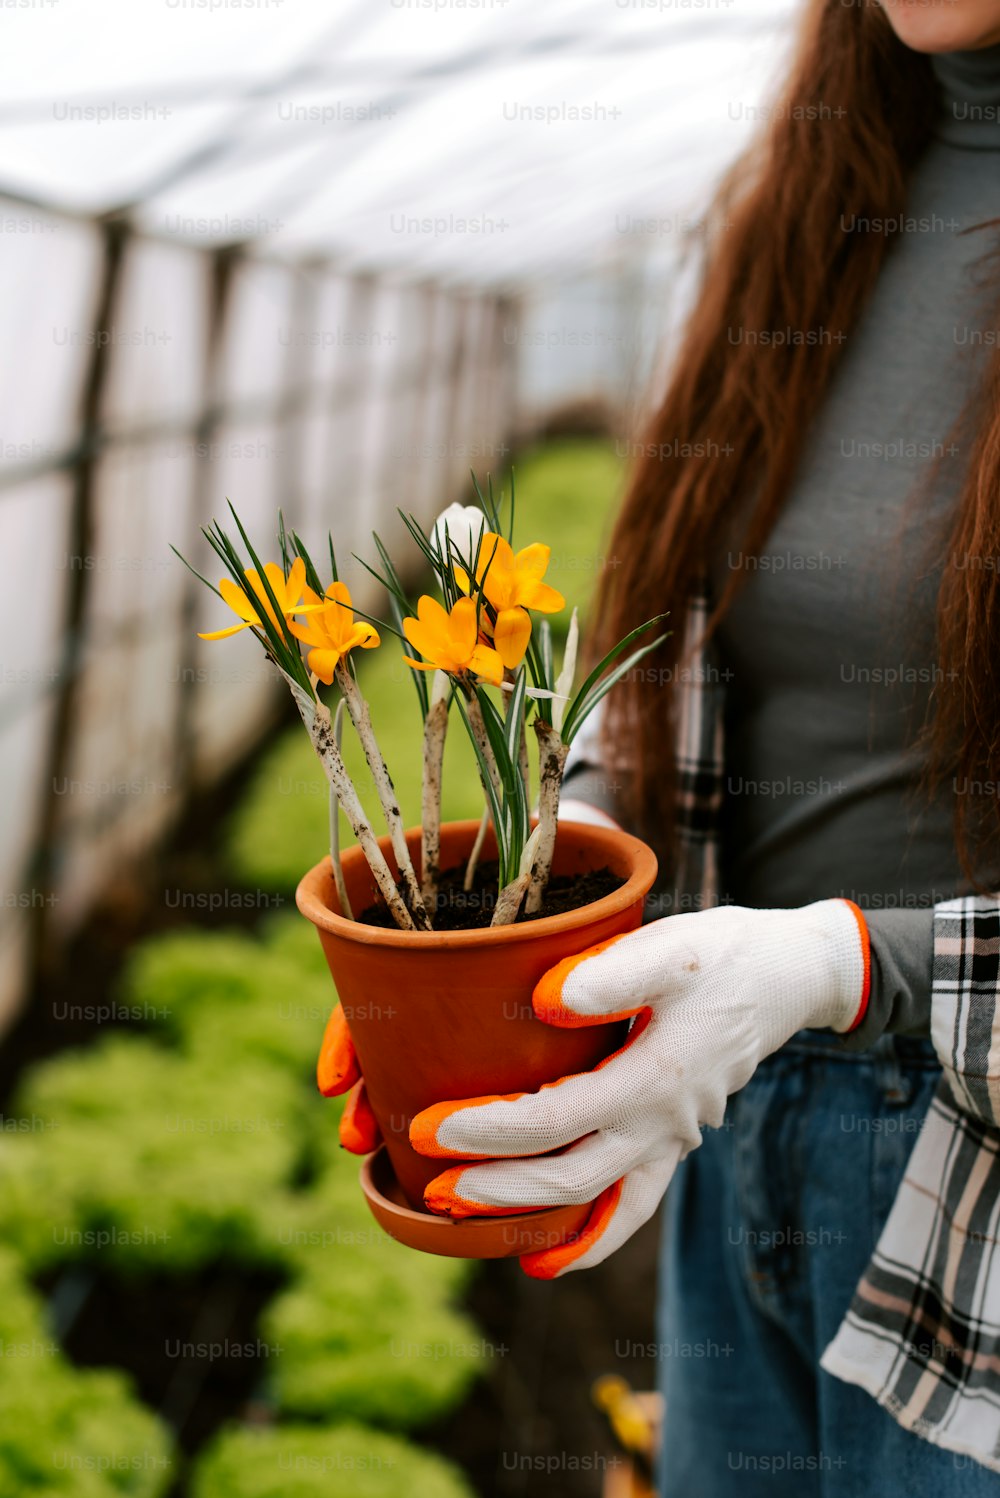 a woman holding a potted plant with yellow flowers